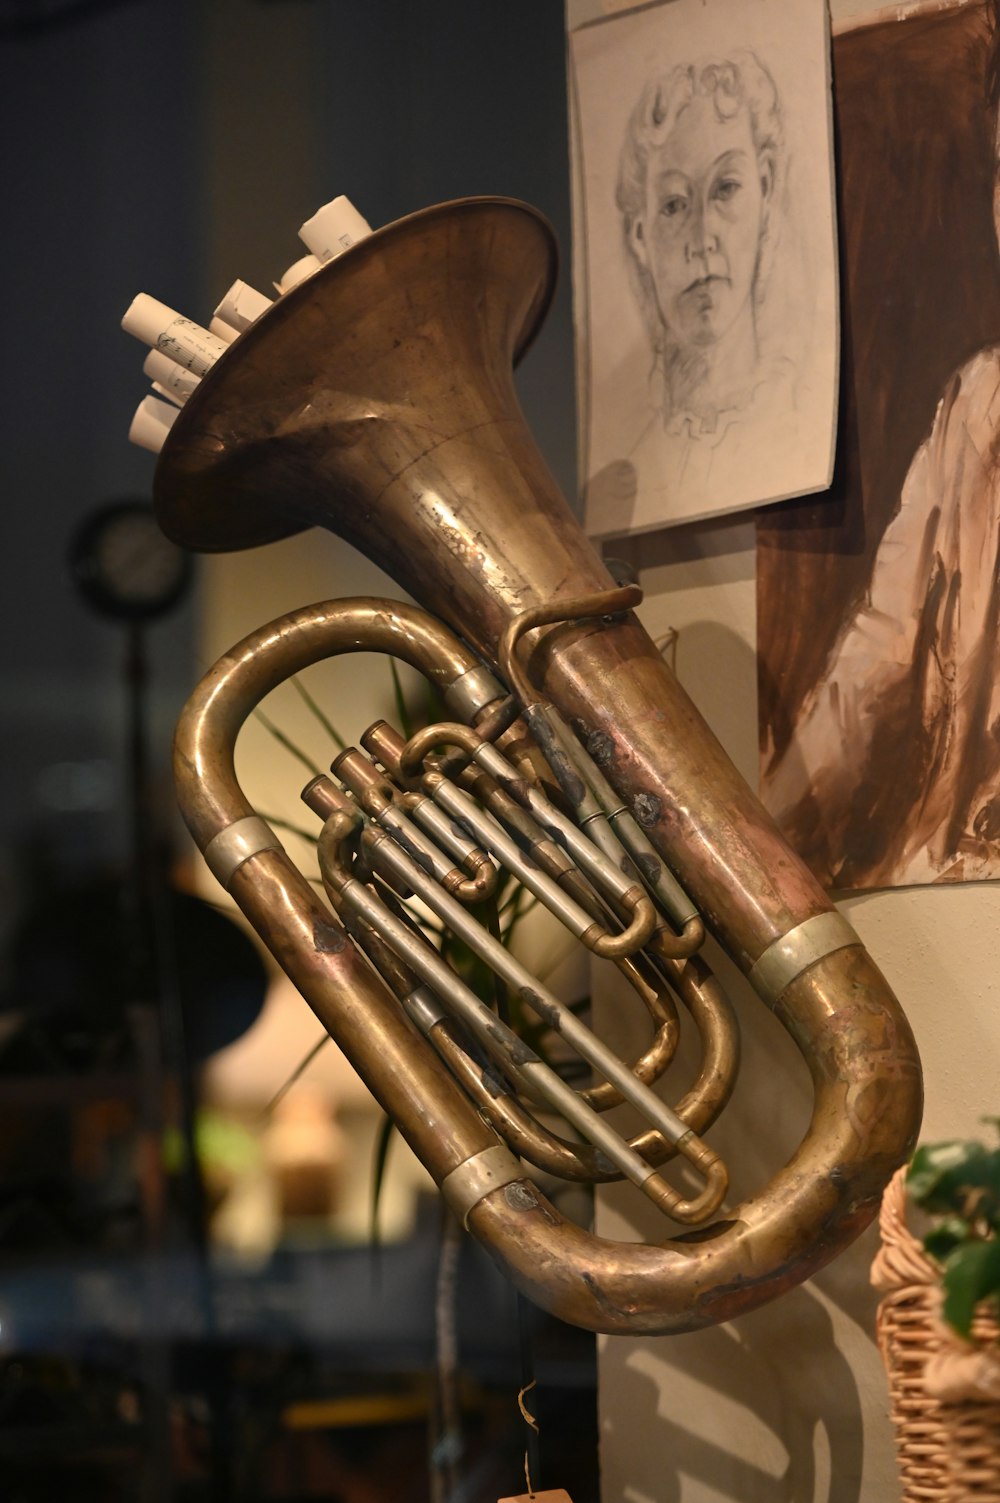 brass-colored trumpet